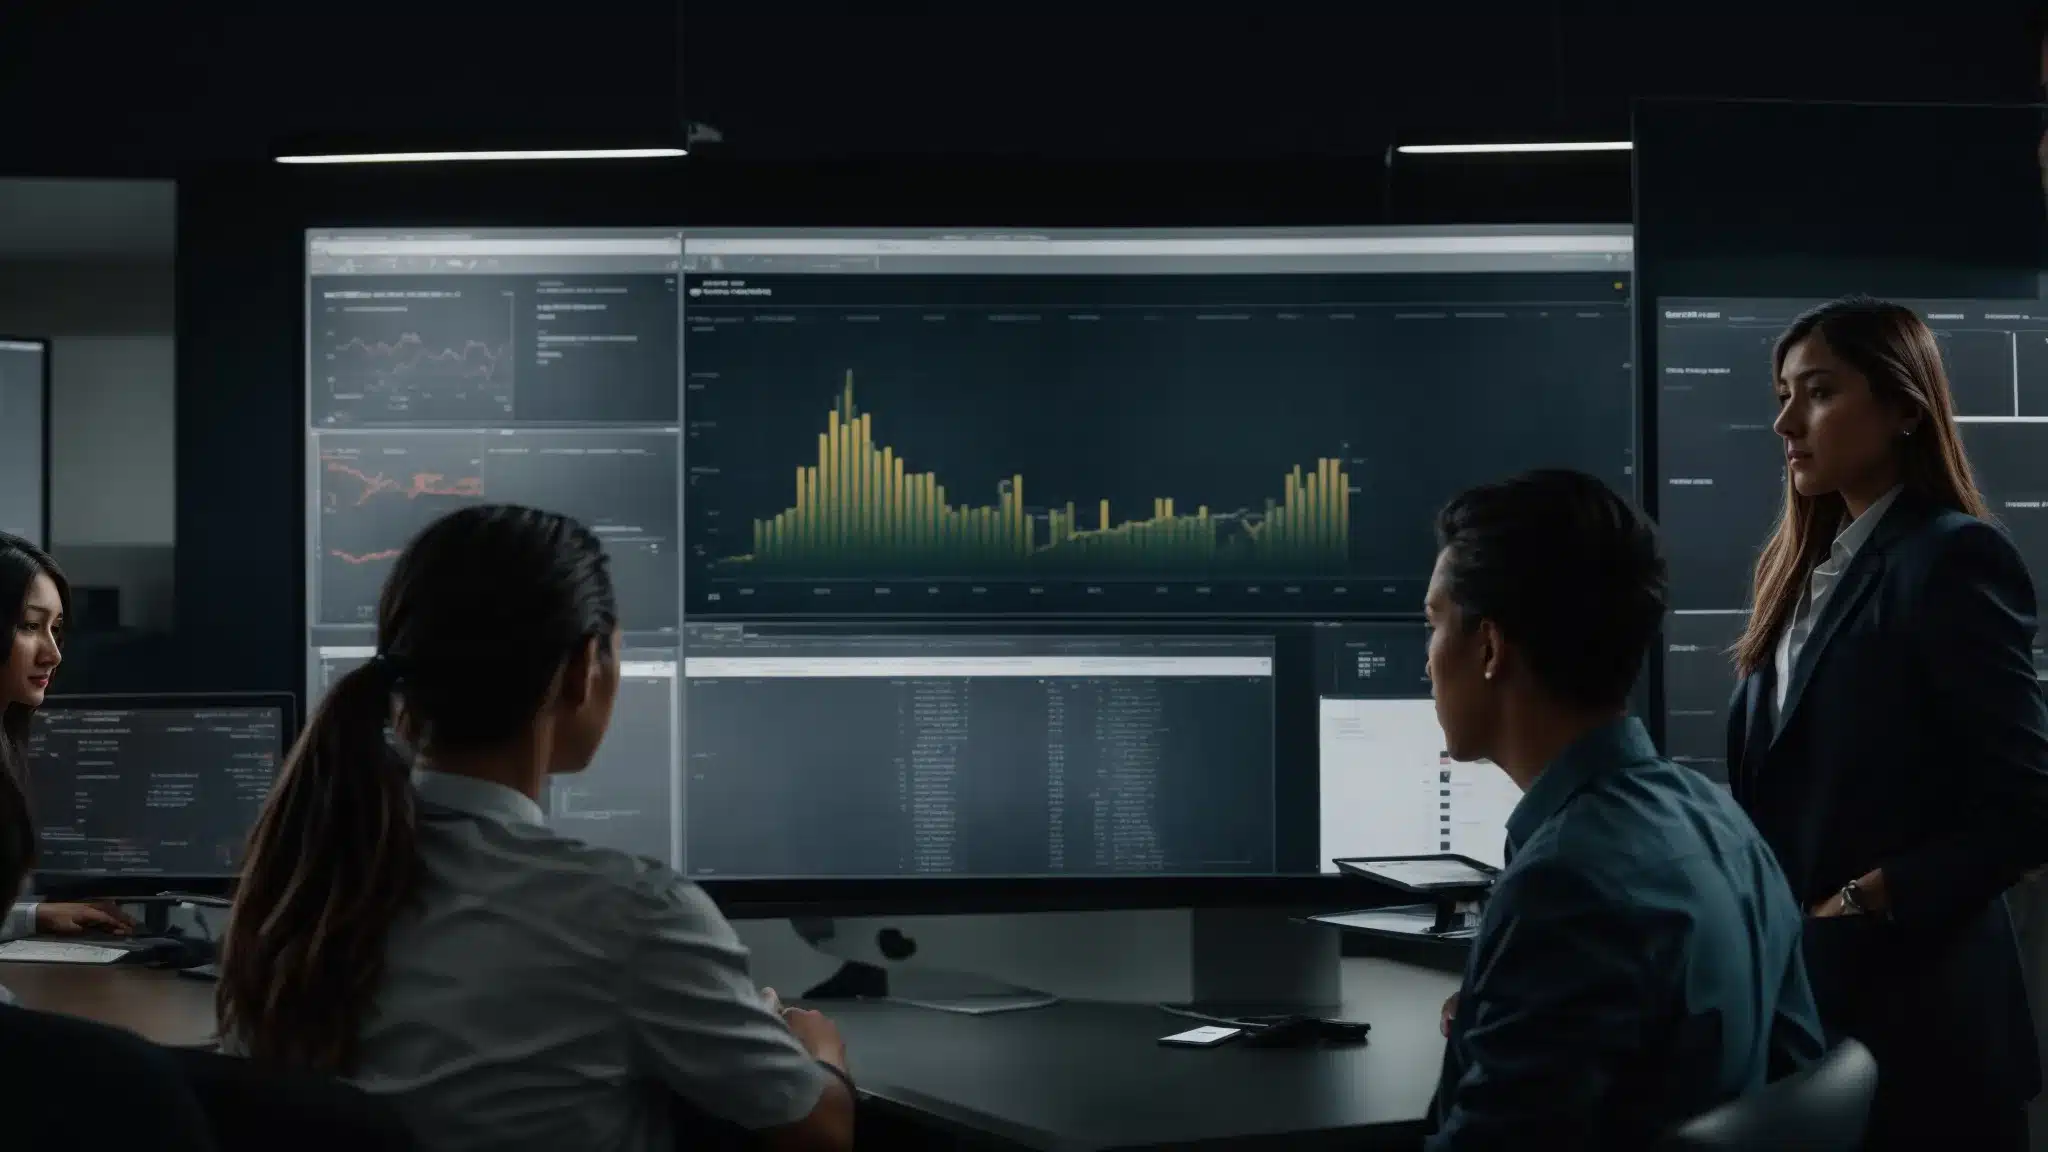 A Marketing Team Analyzes Data On A Large Screen, Discussing Brand Strategy.